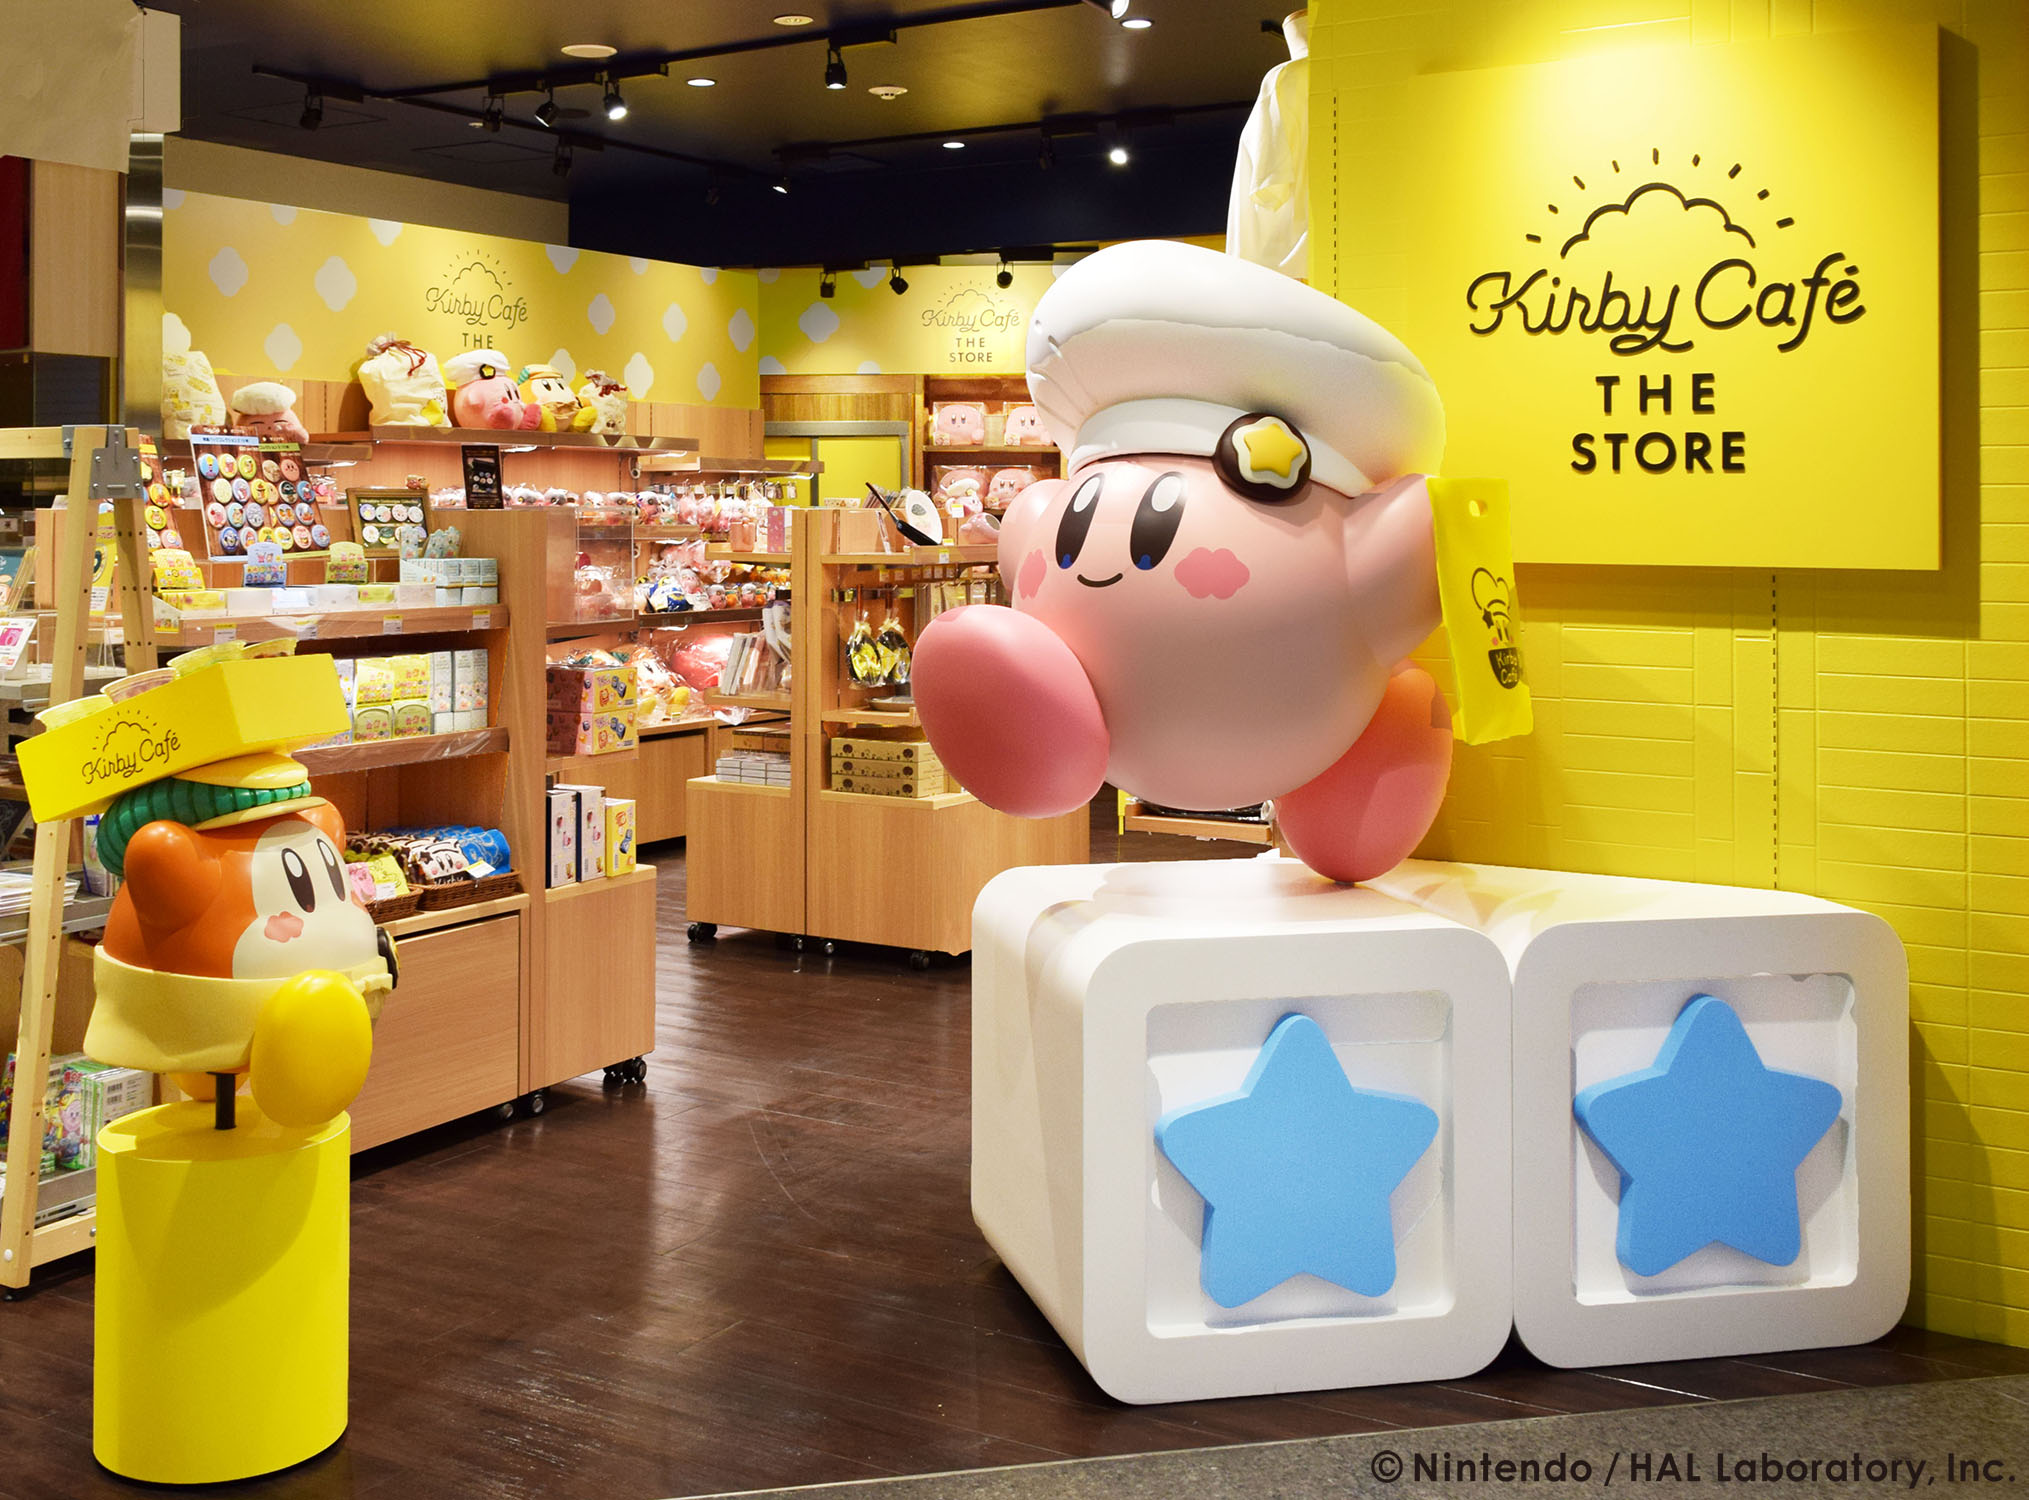 Kirby Café THE STORE (カービィカフェ ザ・ストア)